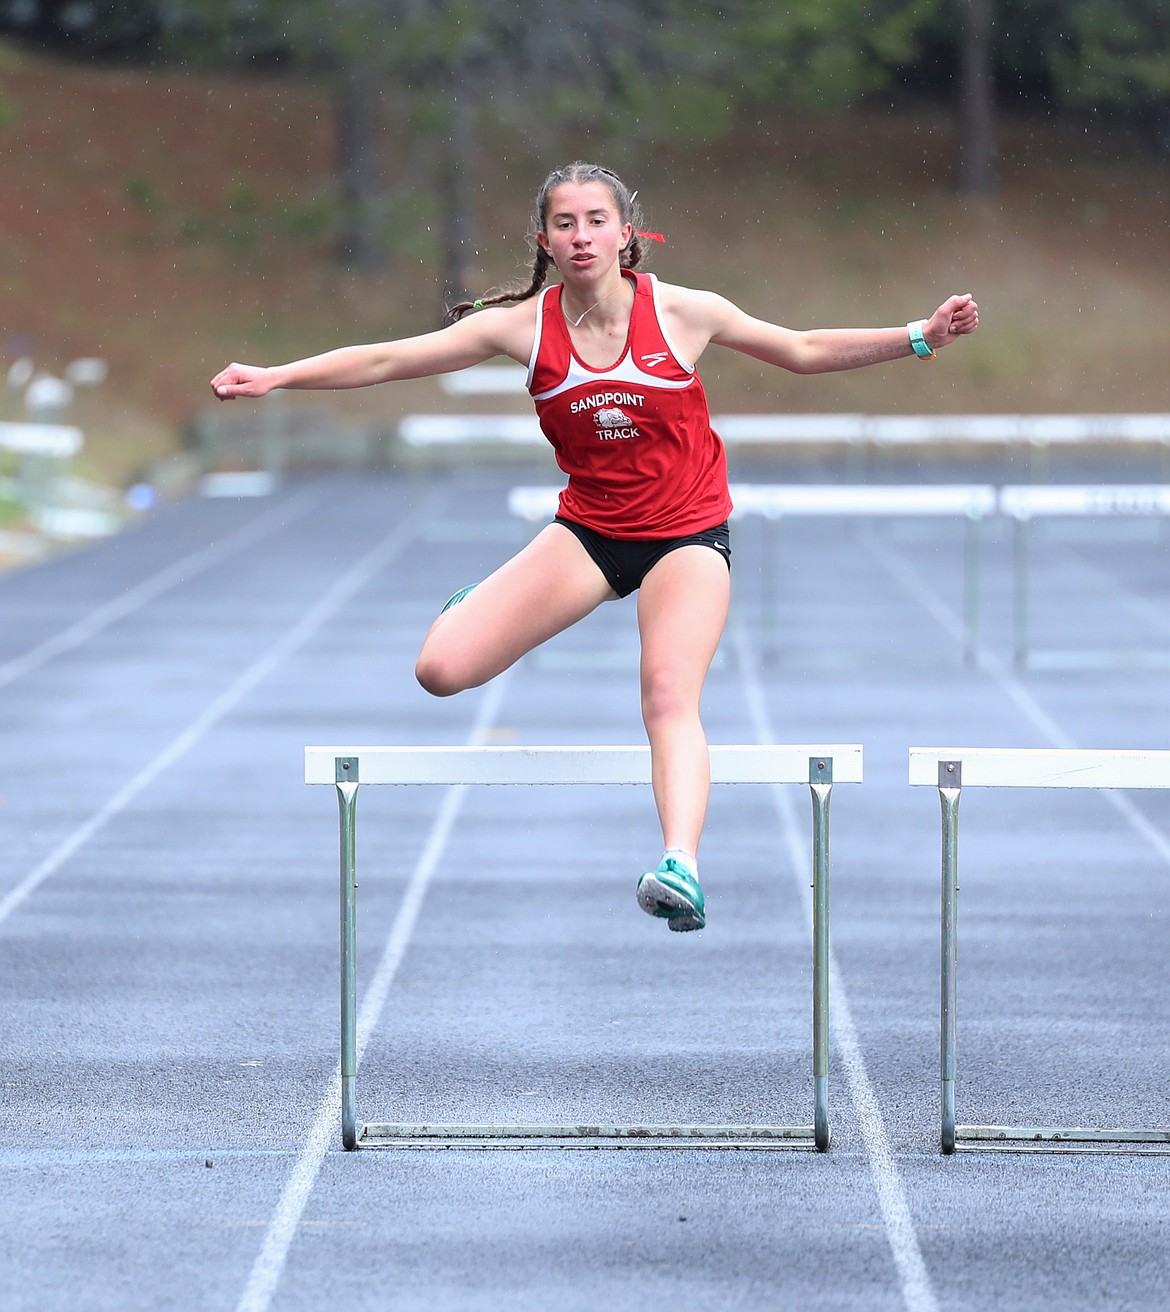 Payton Betz competes in the 300 hurdles on Saturday.